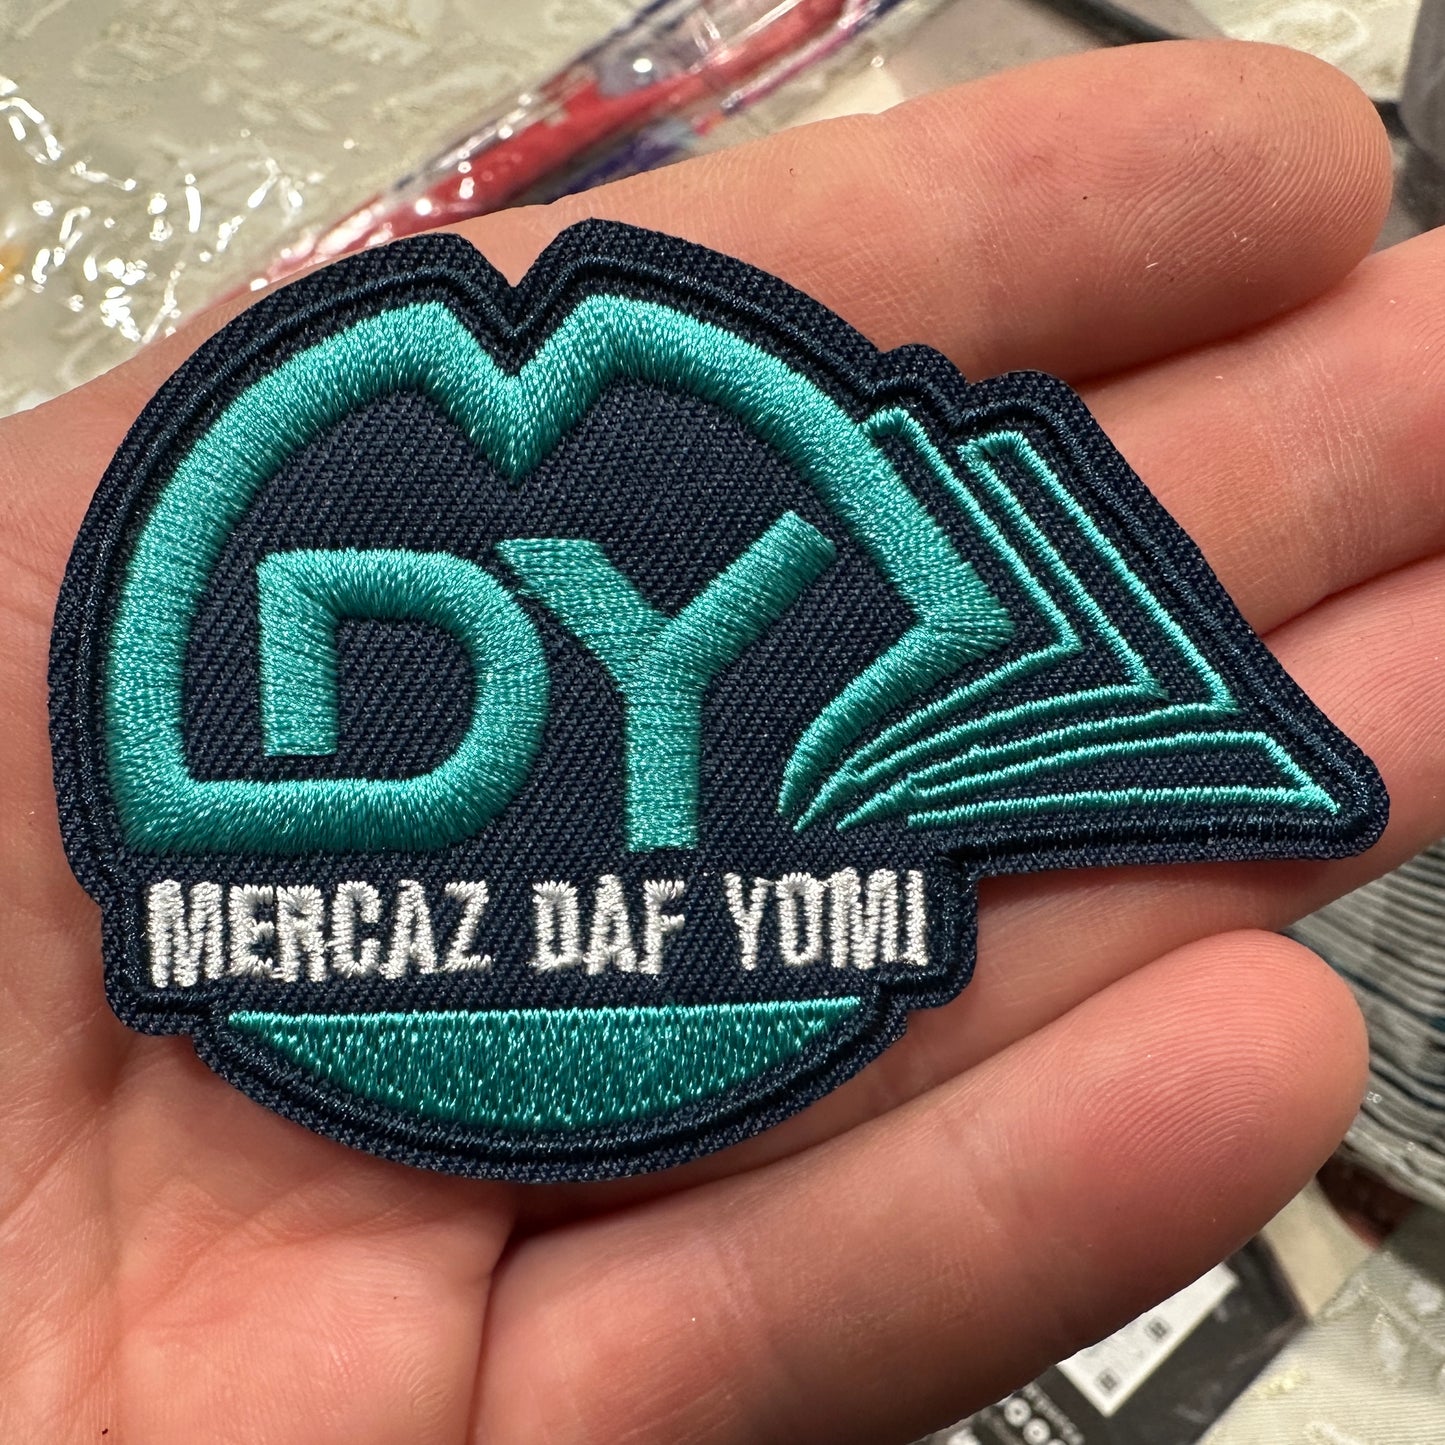 MDY Embroidered Iron-on Patch